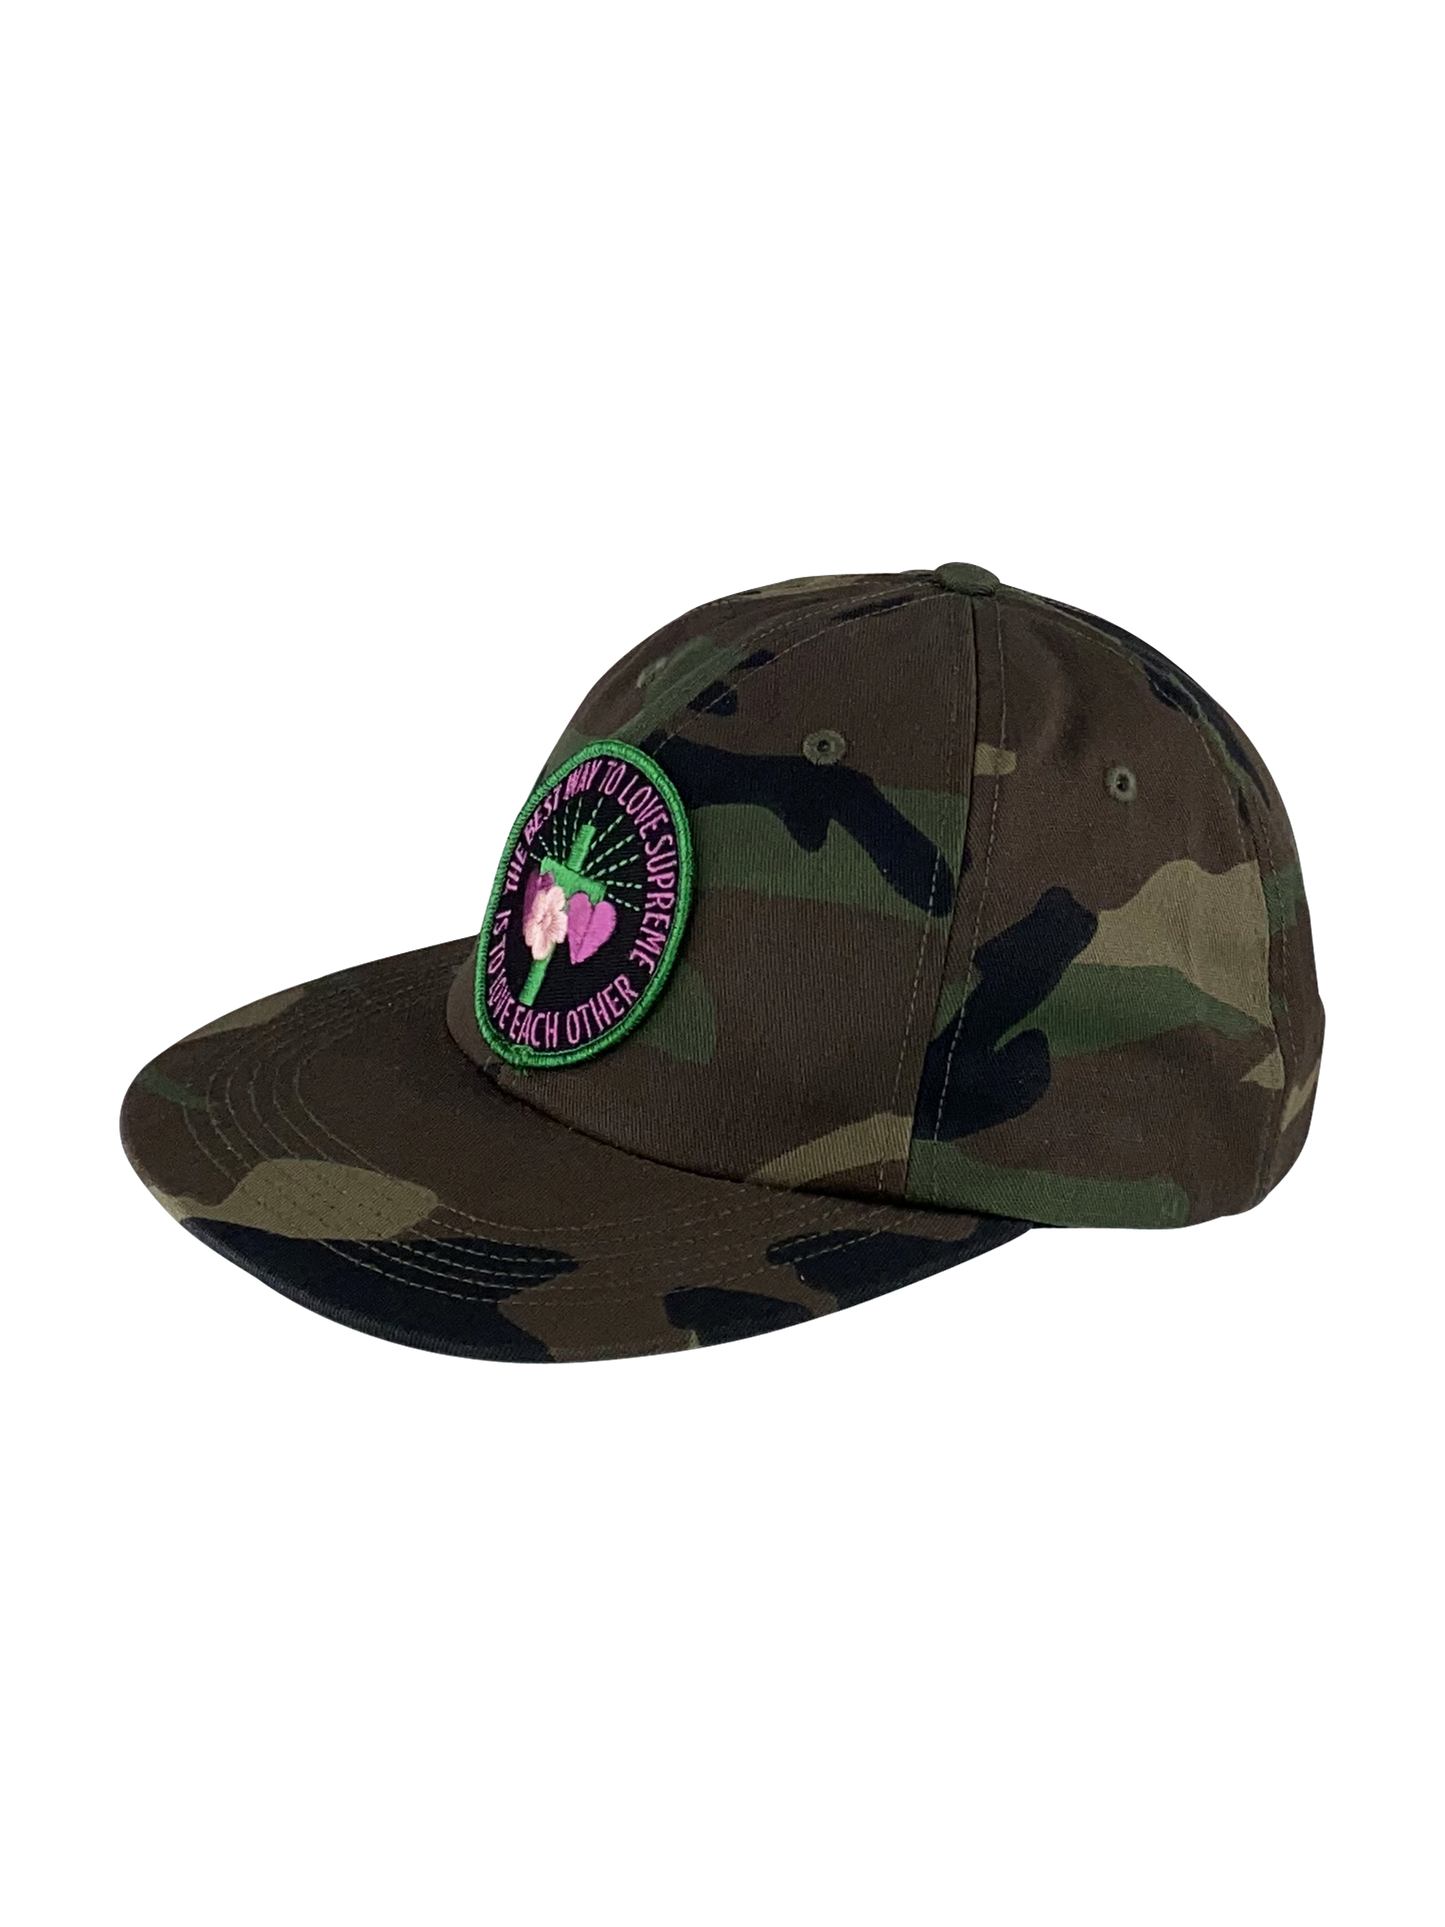 Supreme Cap “Love Each Other 6-Panel“ - Woodland CAMO